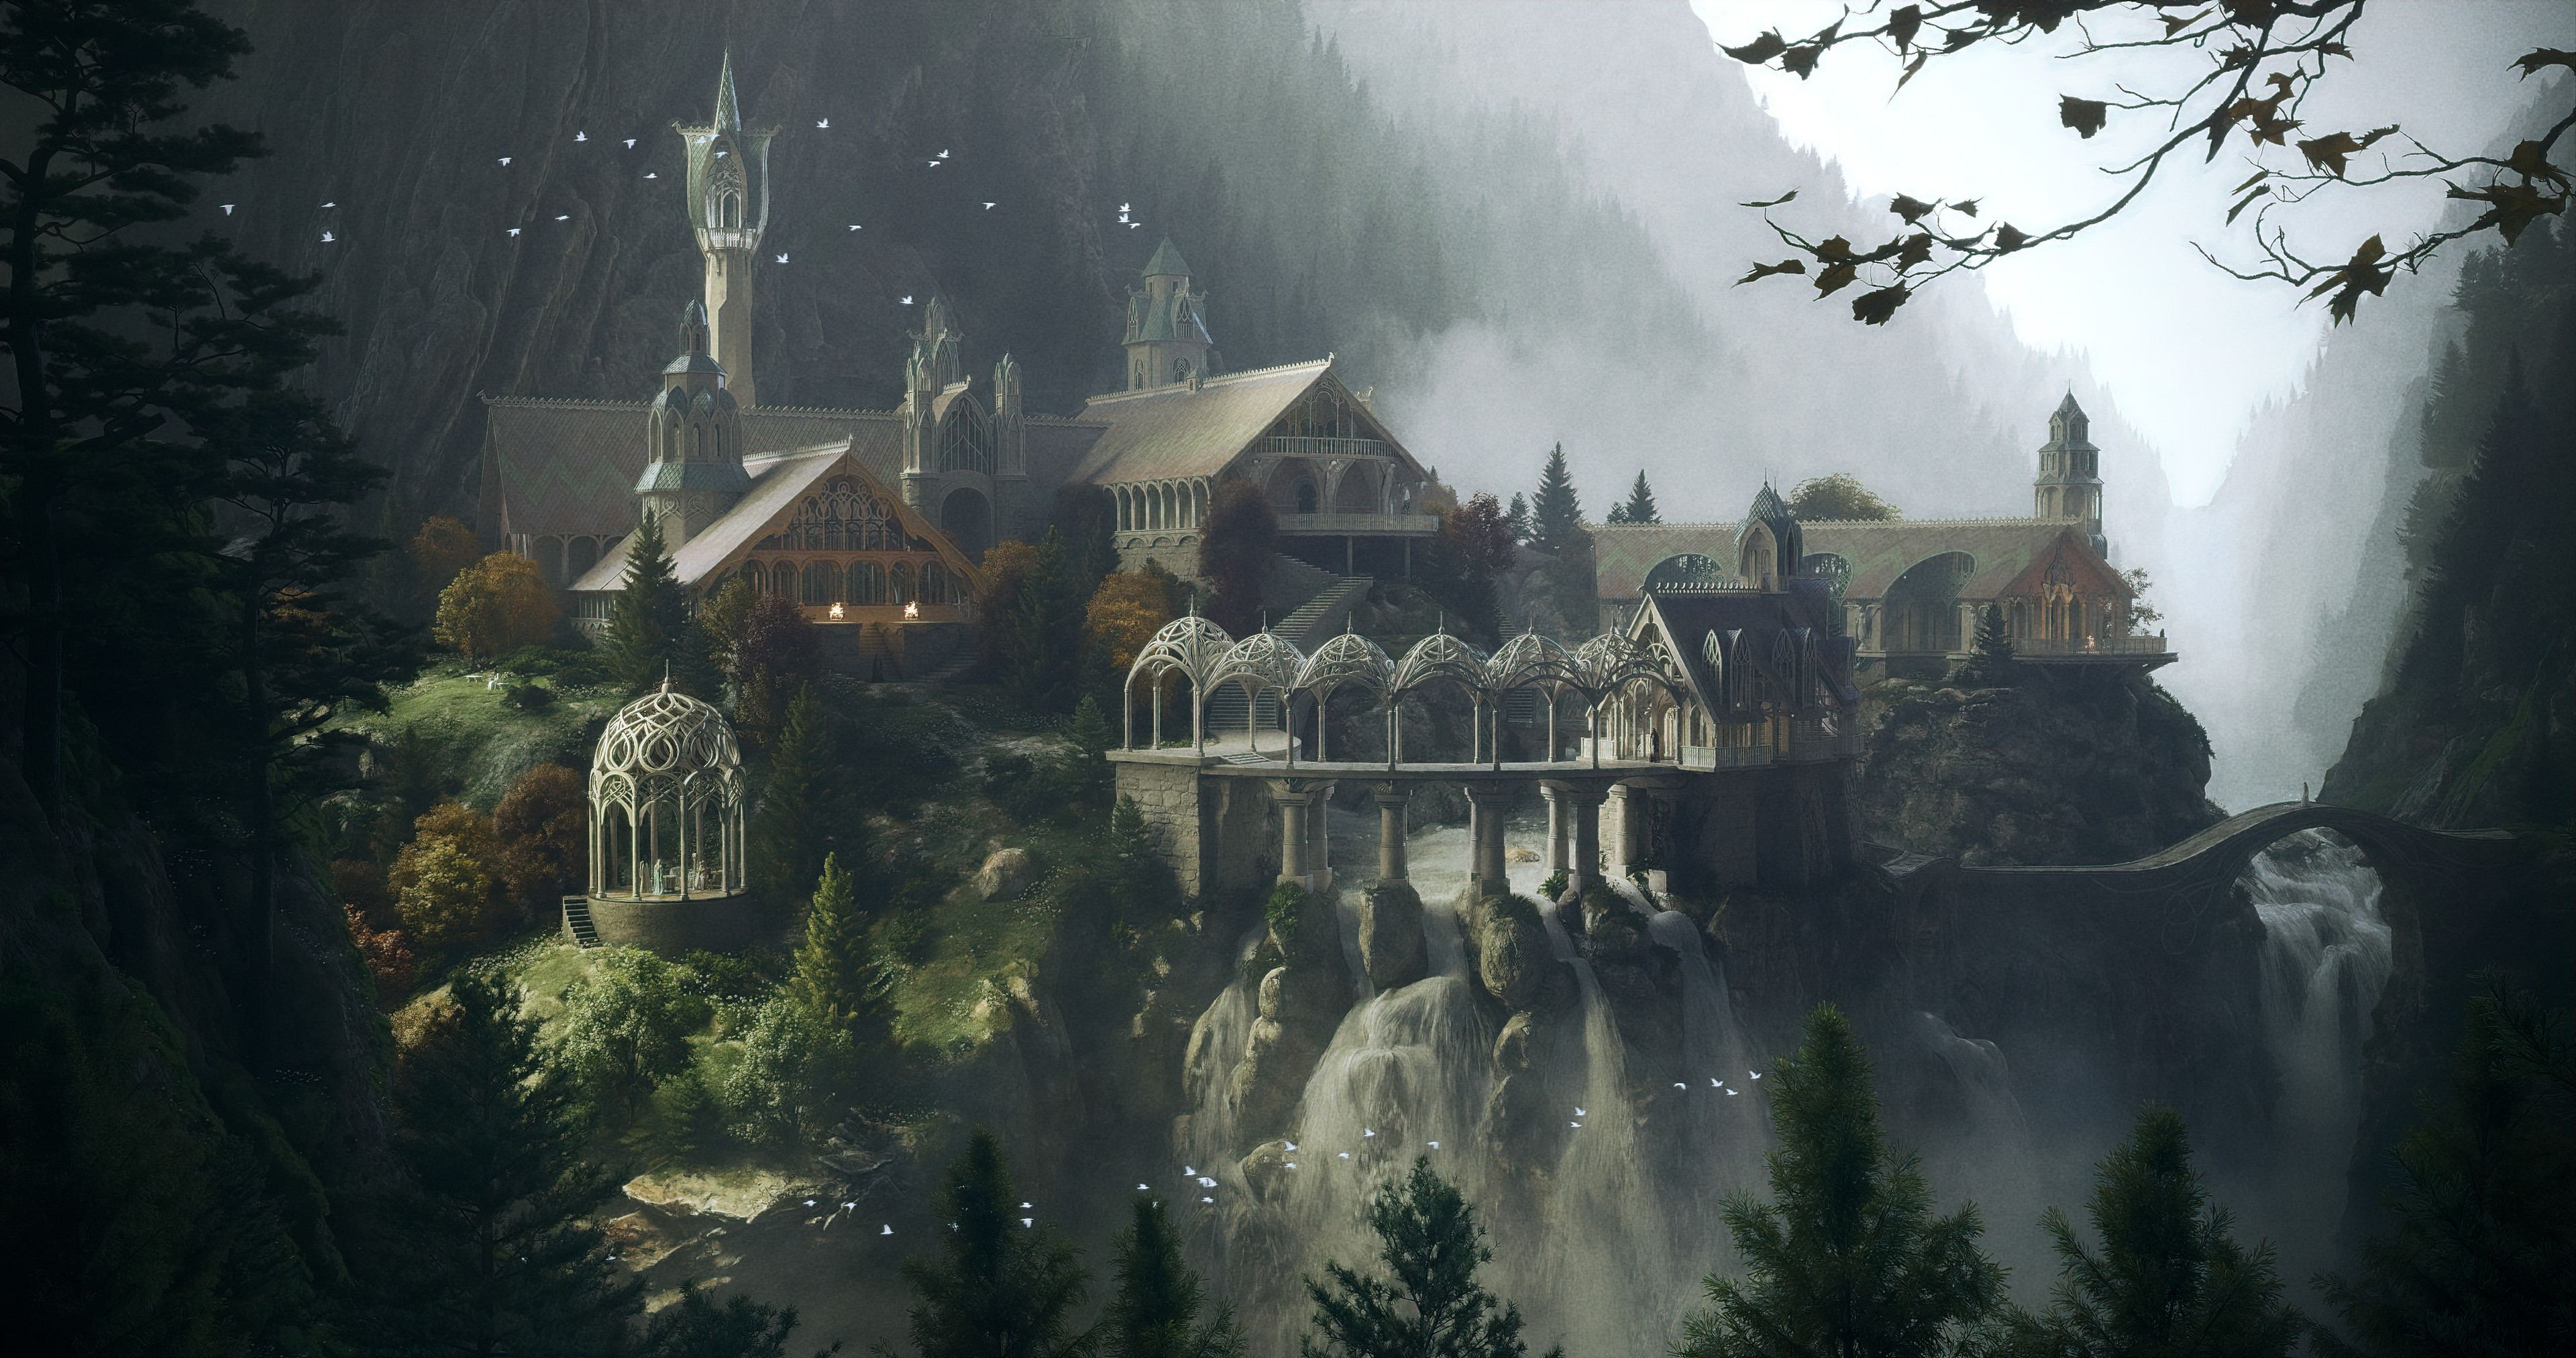 Rivendell, the last Homely House